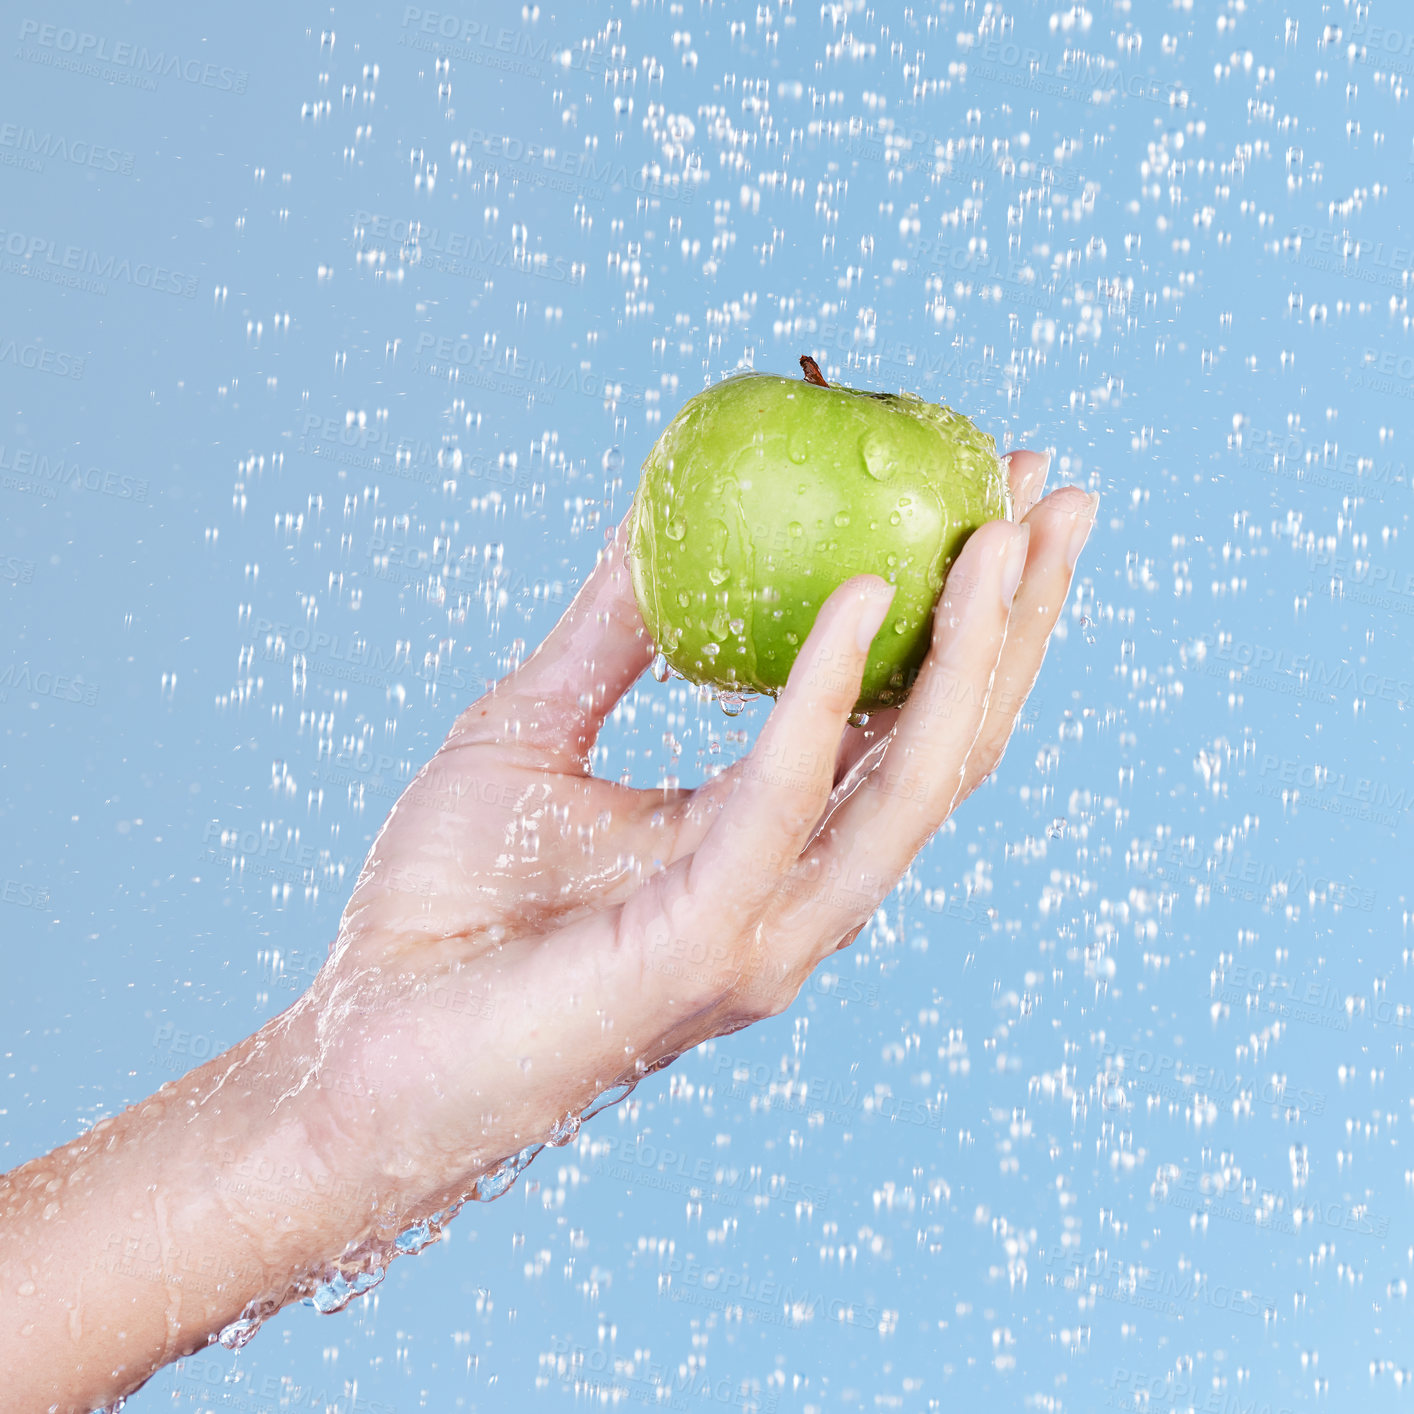 Buy stock photo Studio shot of an unrecognisable woman holding a green apple under running water against a blue background